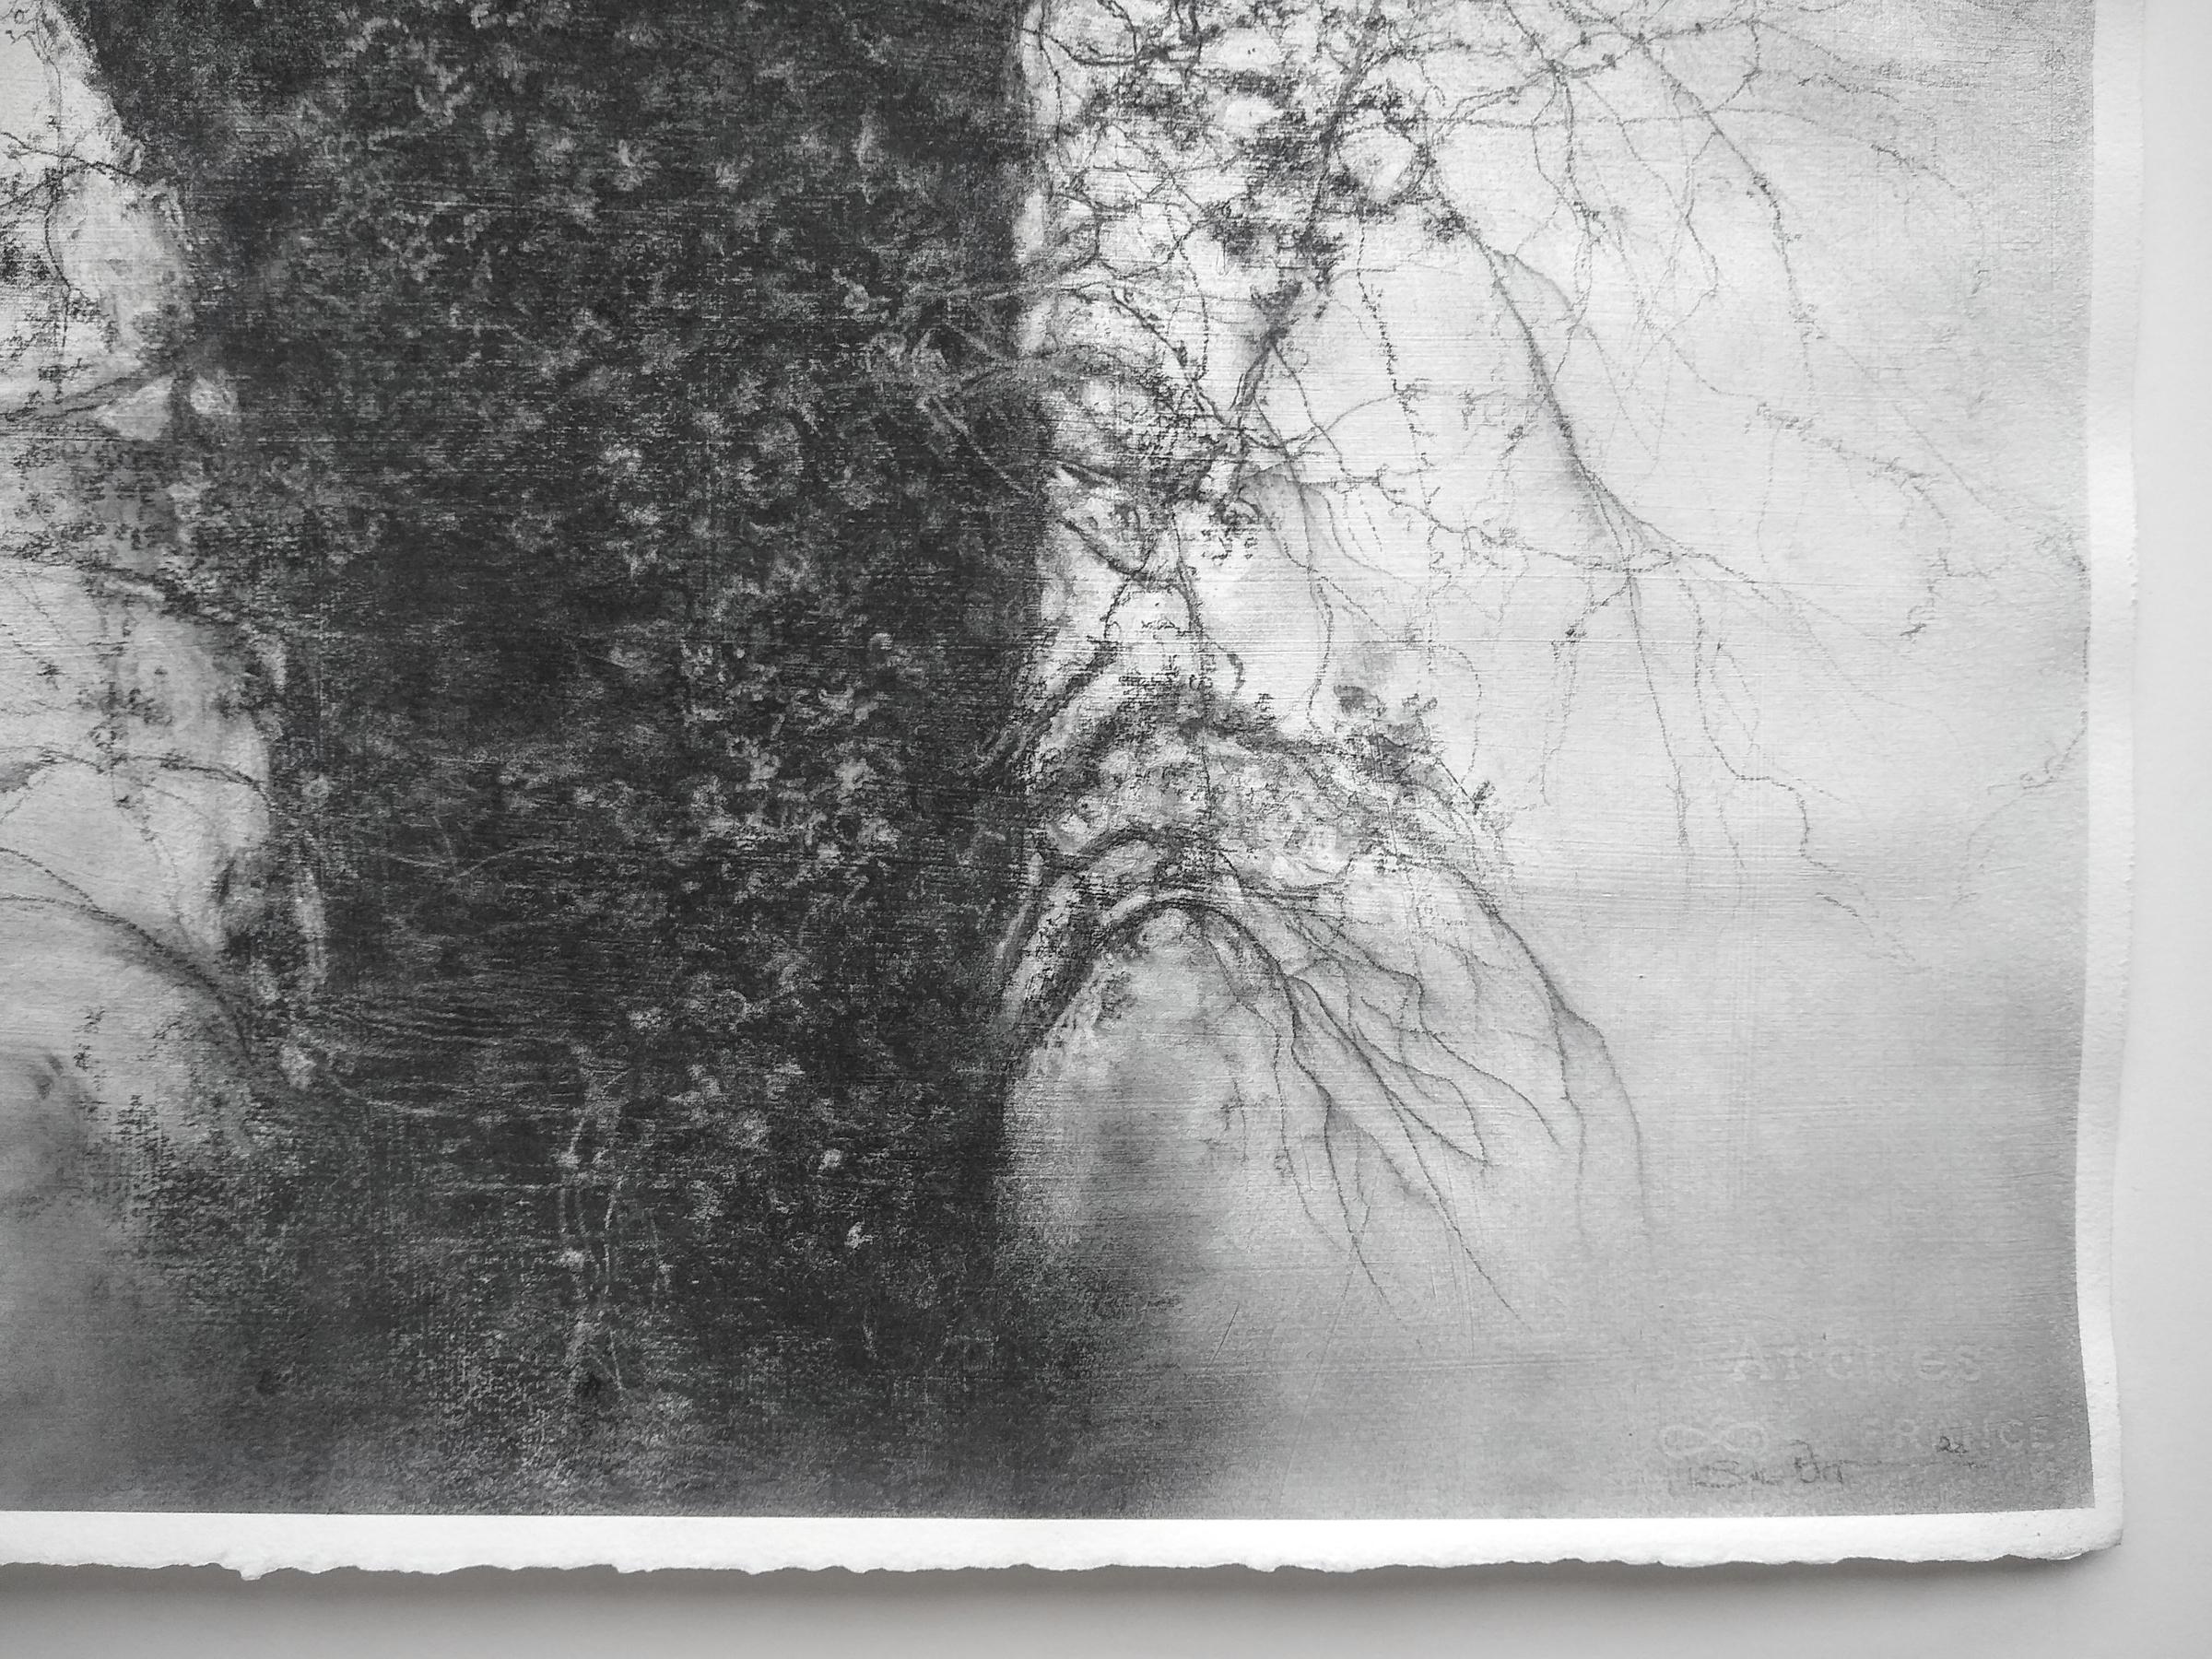 Beneath The Dripping Trees (Realistic Black & White Charcoal Landscape Drawing) - Modern Art by Sue Bryan